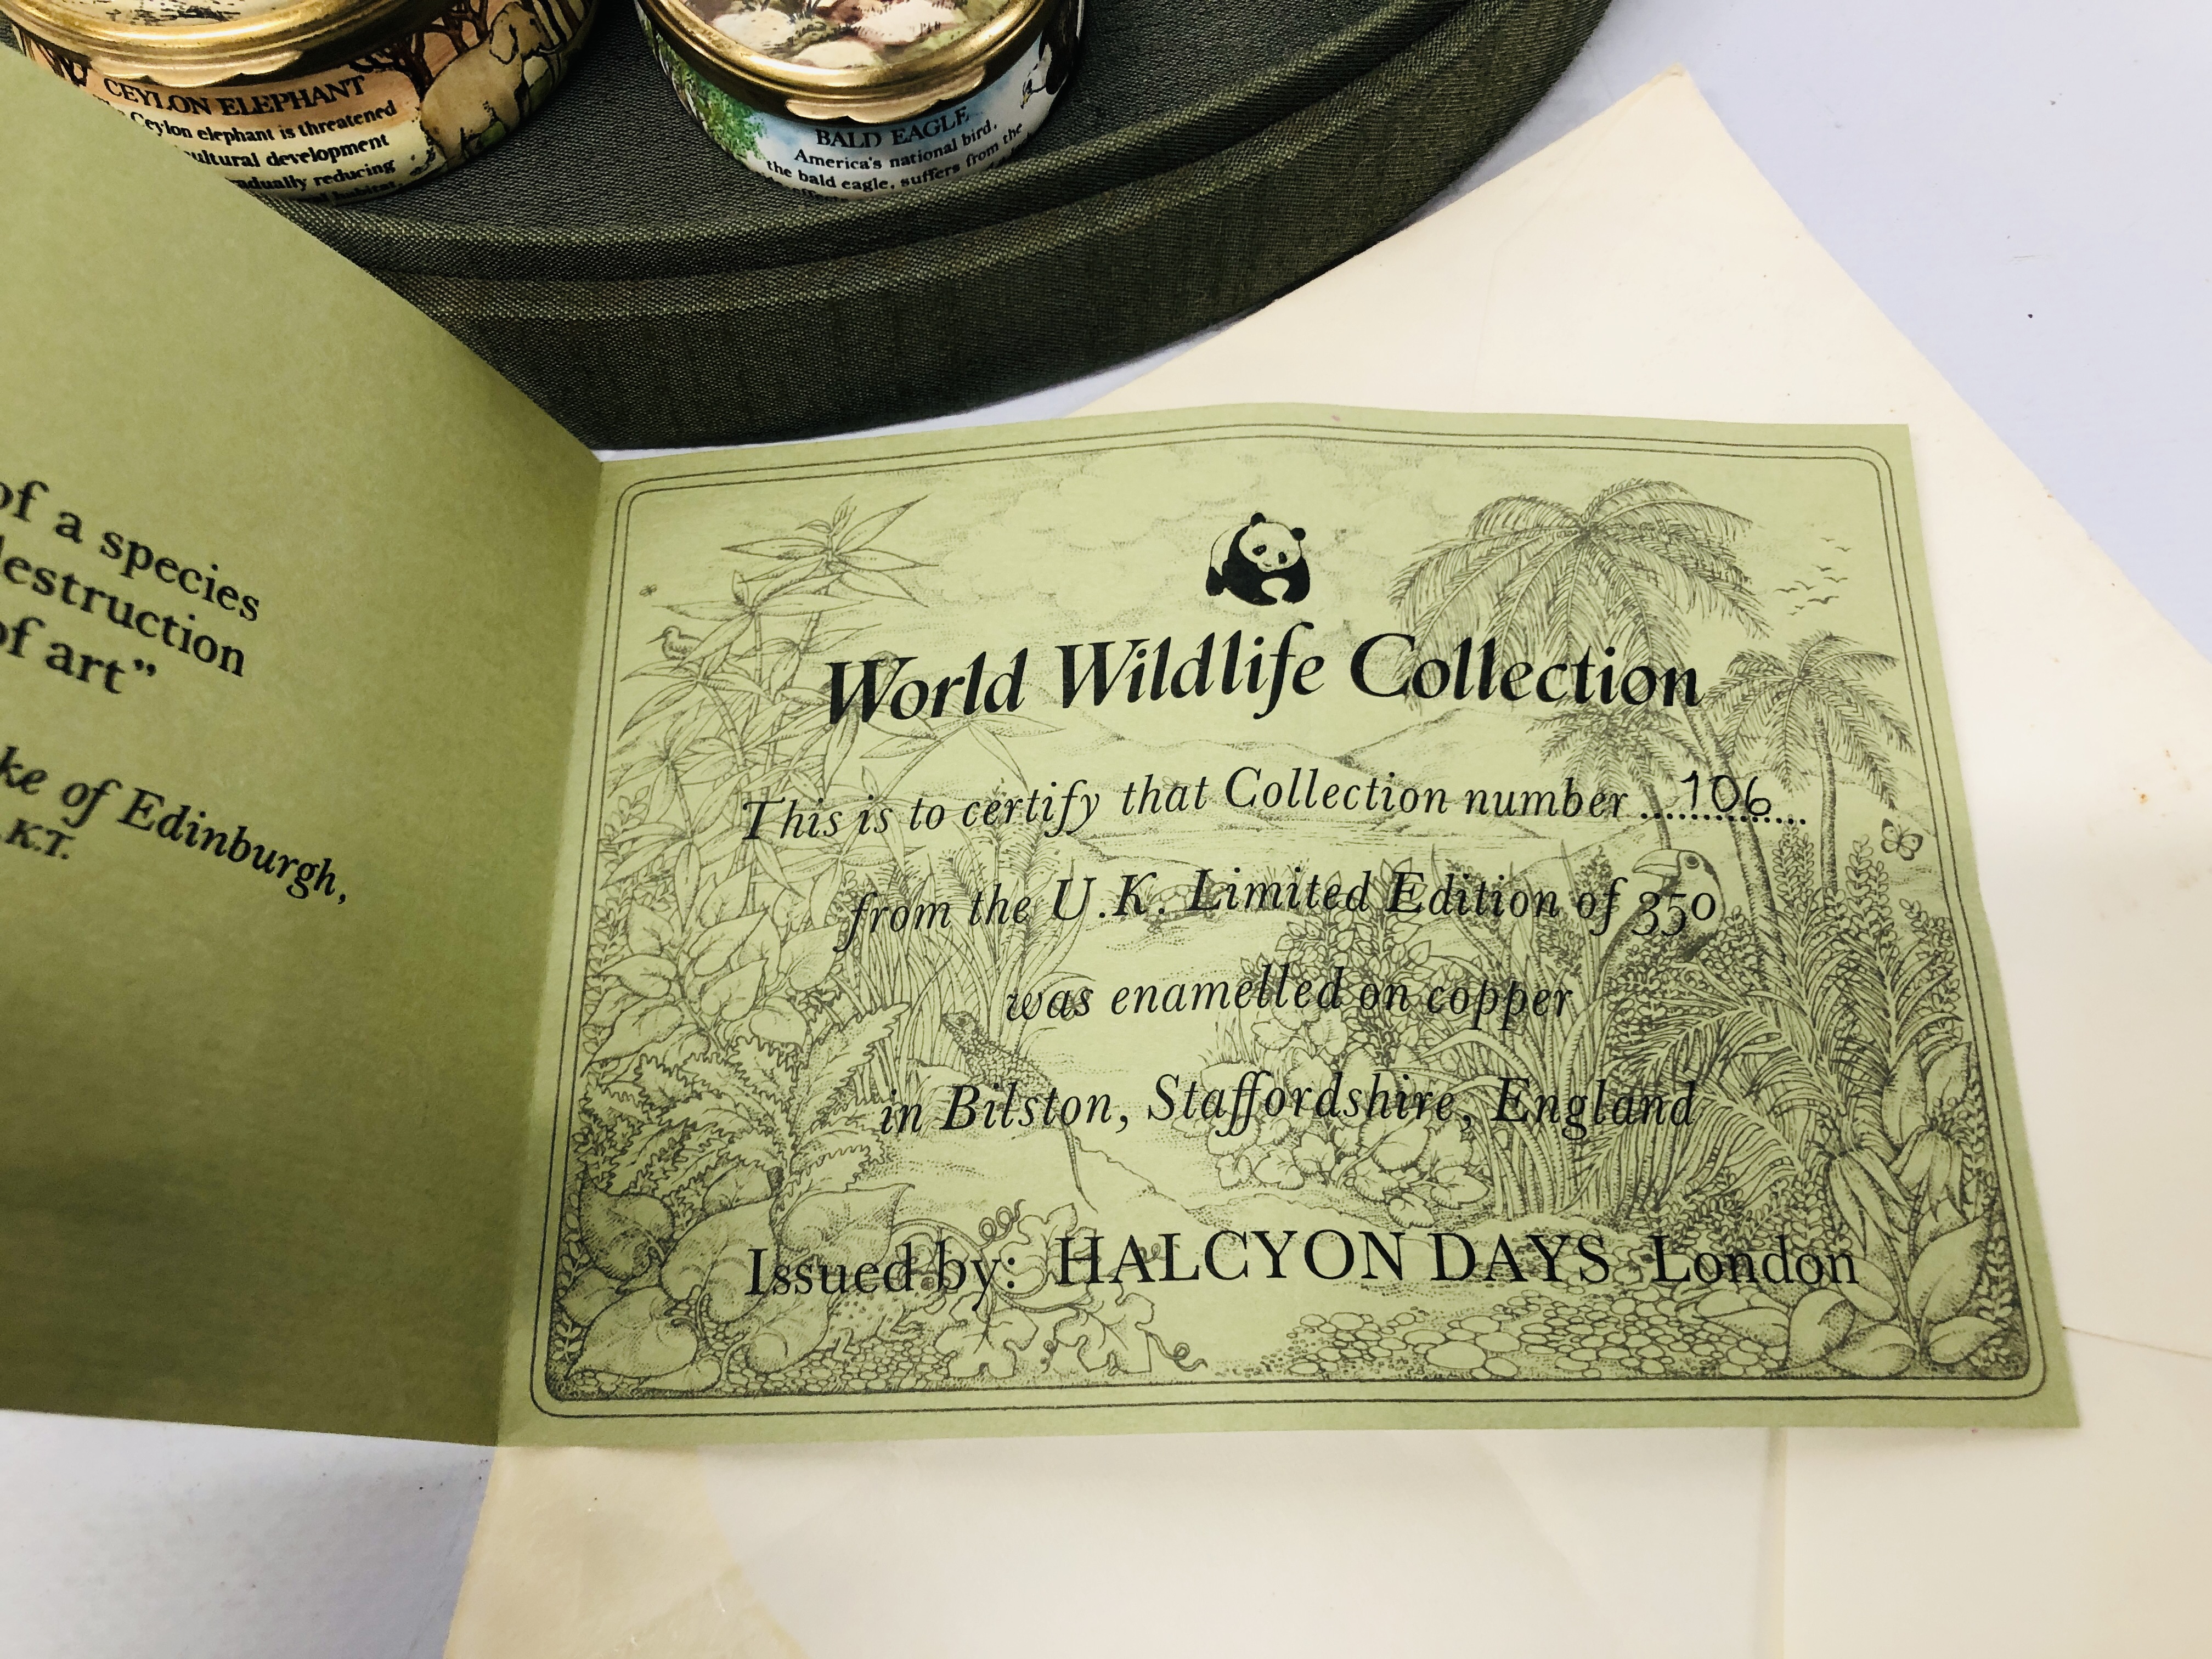 CASED SET OF 6 BILSTON AND BATTERSEA ENAMELS "WORLD WILDLIFE COLLECTION" LIMITED EDITION 106/350 - Image 4 of 5